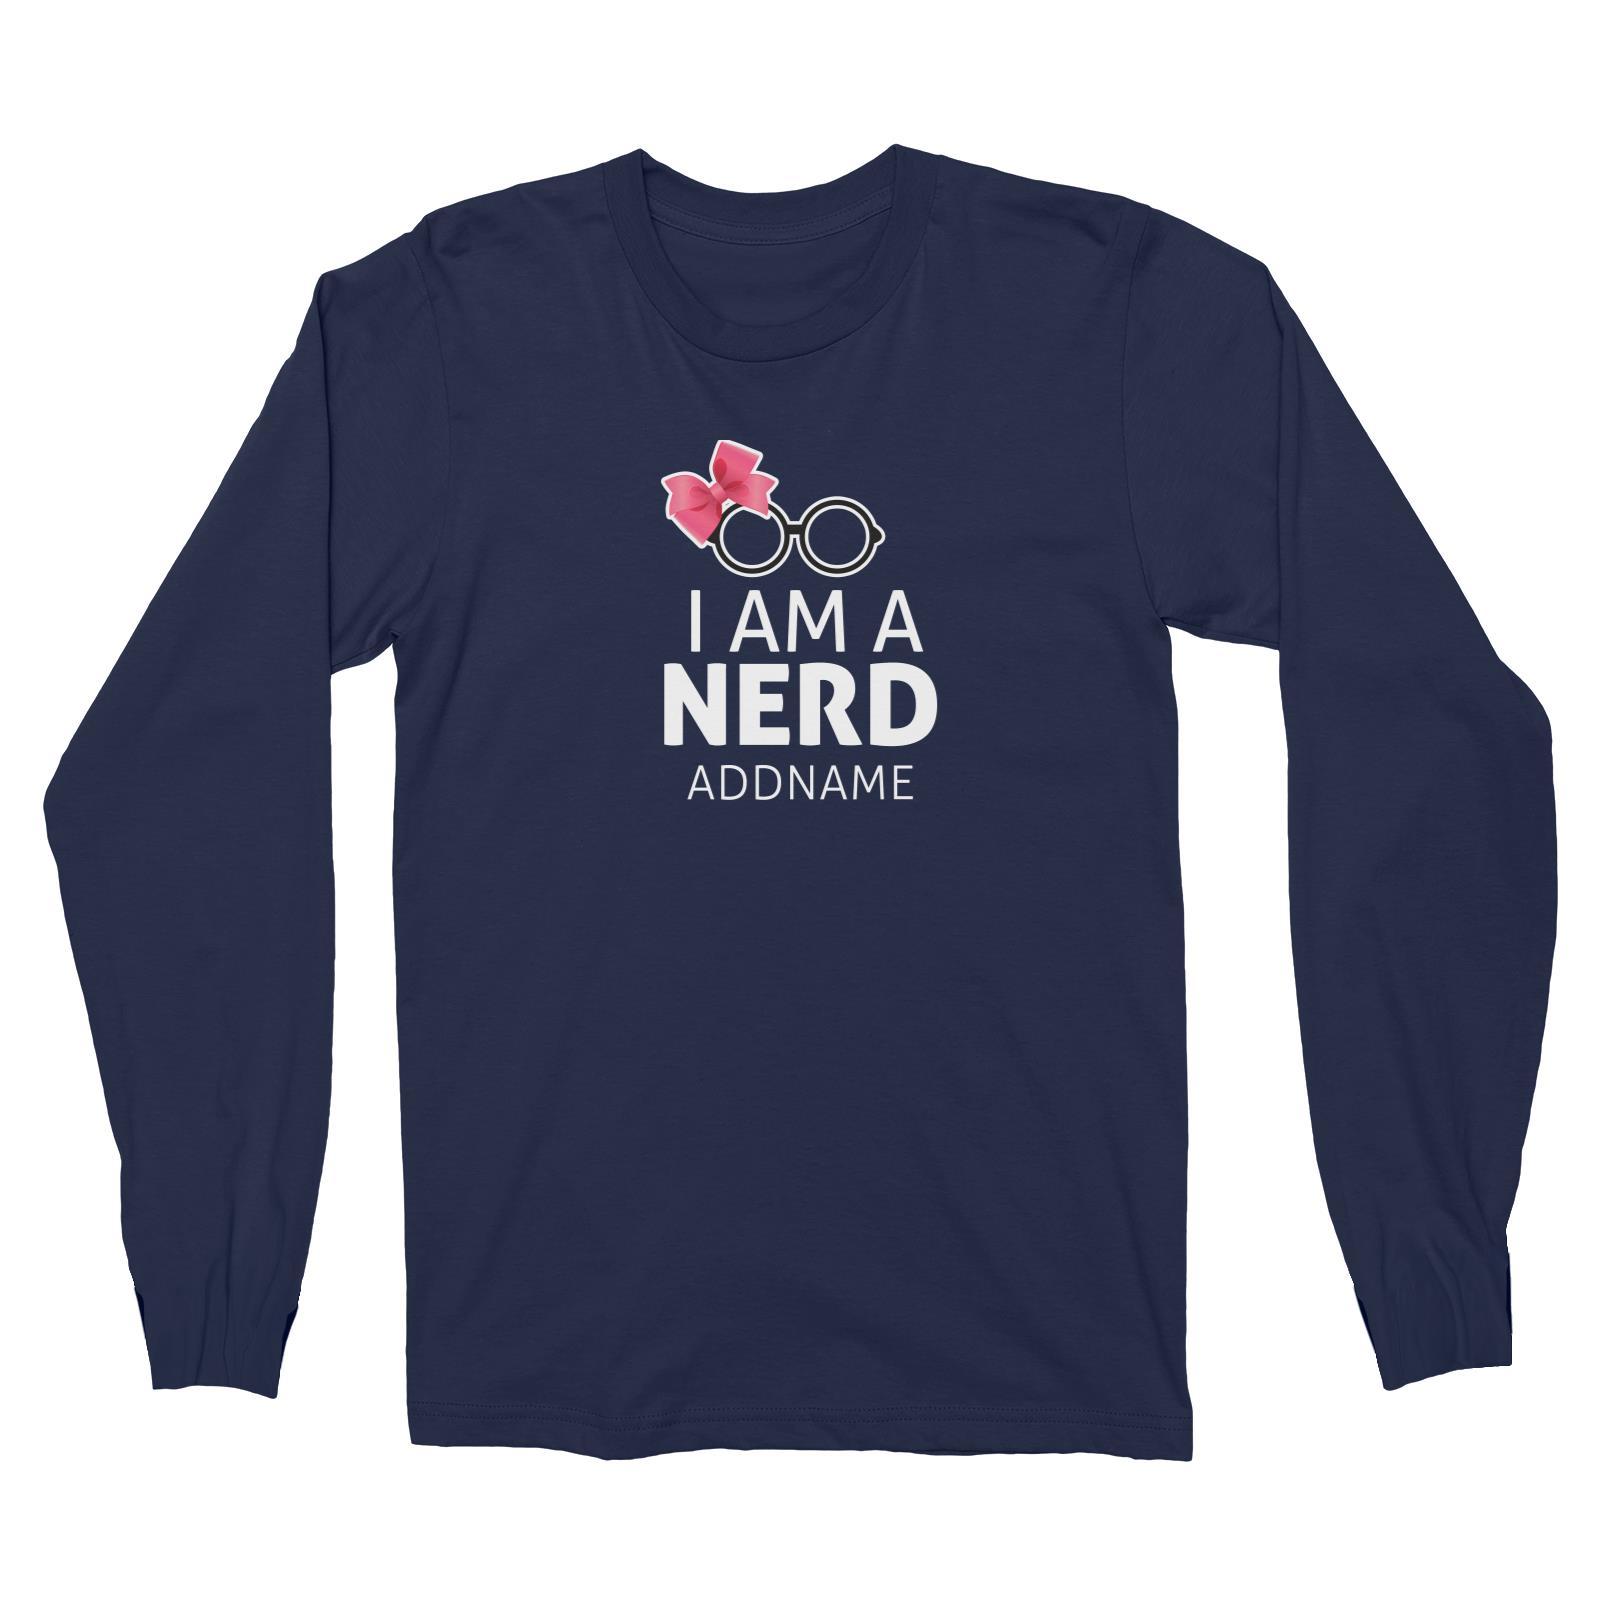 I Am A Nerd With Ribbon And Glasses Long Sleeve Unisex T-Shirt